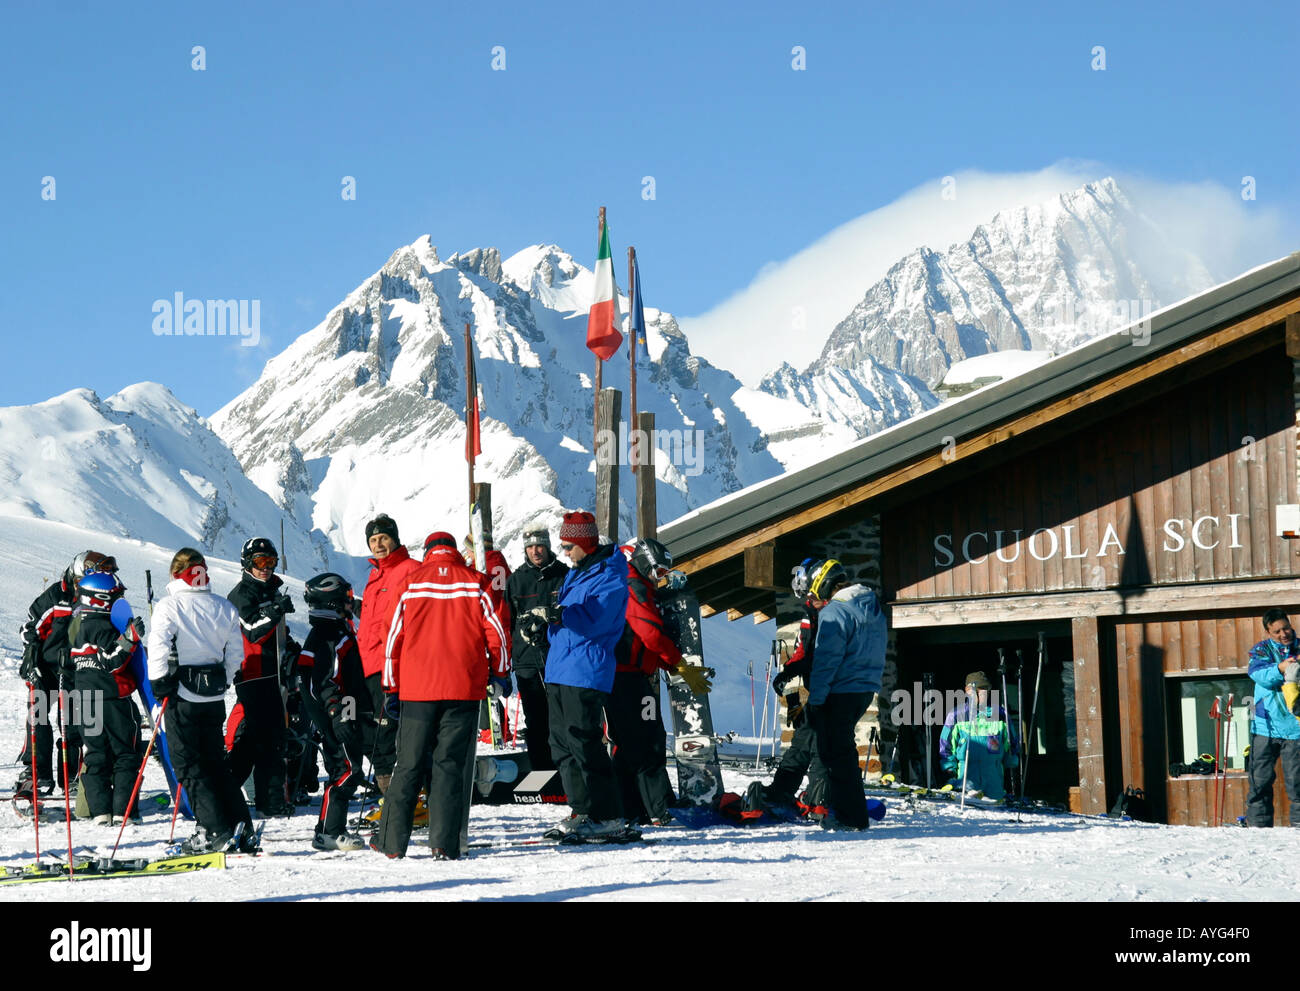 Ski school meeting place in the Italian ski resort of La Thuile with Mont Blanc in the background Stock Photo